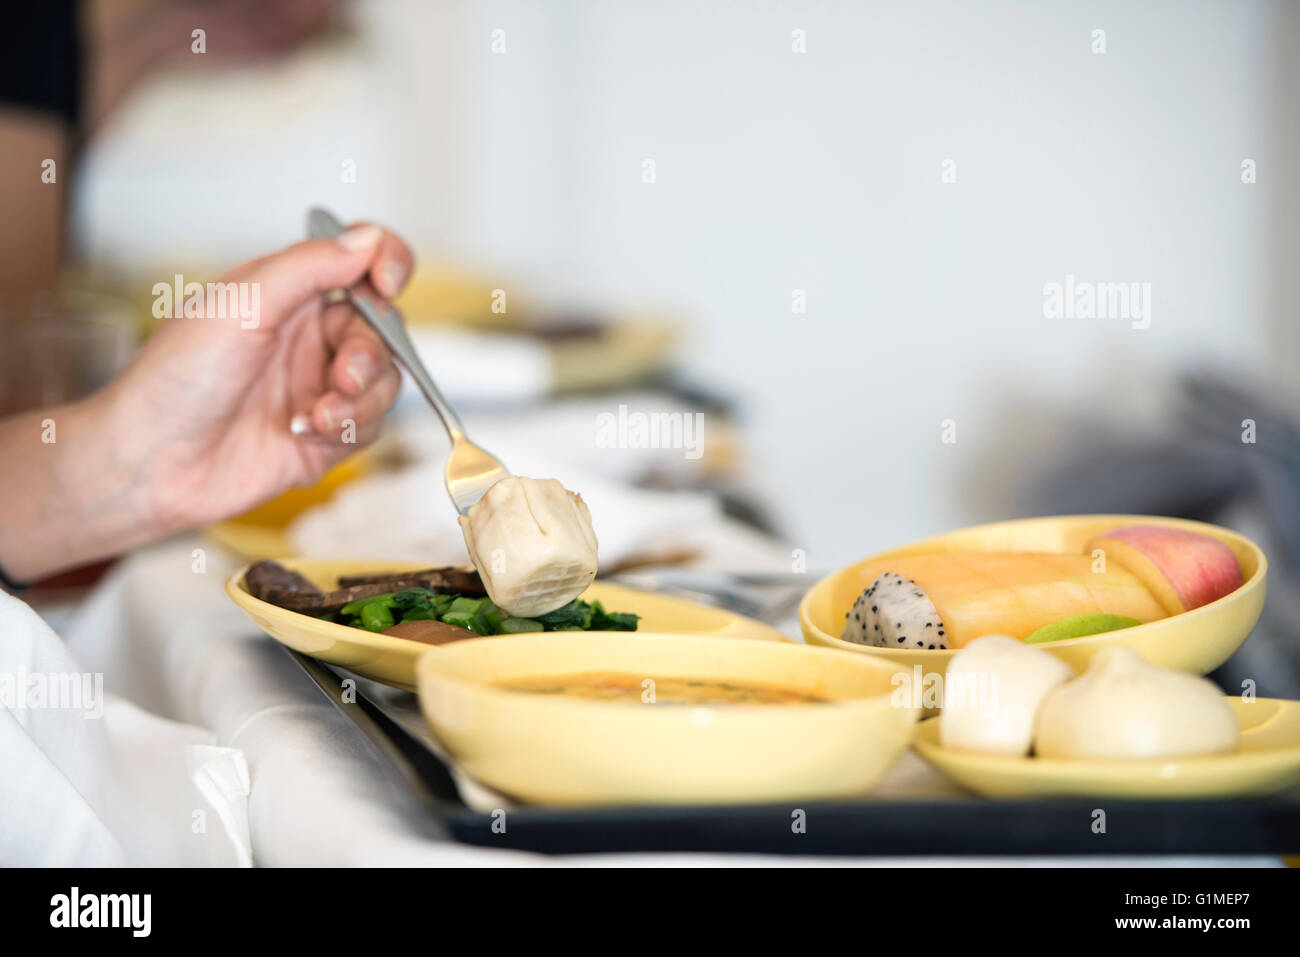 left-handed woman eating airline meal Stock Photo